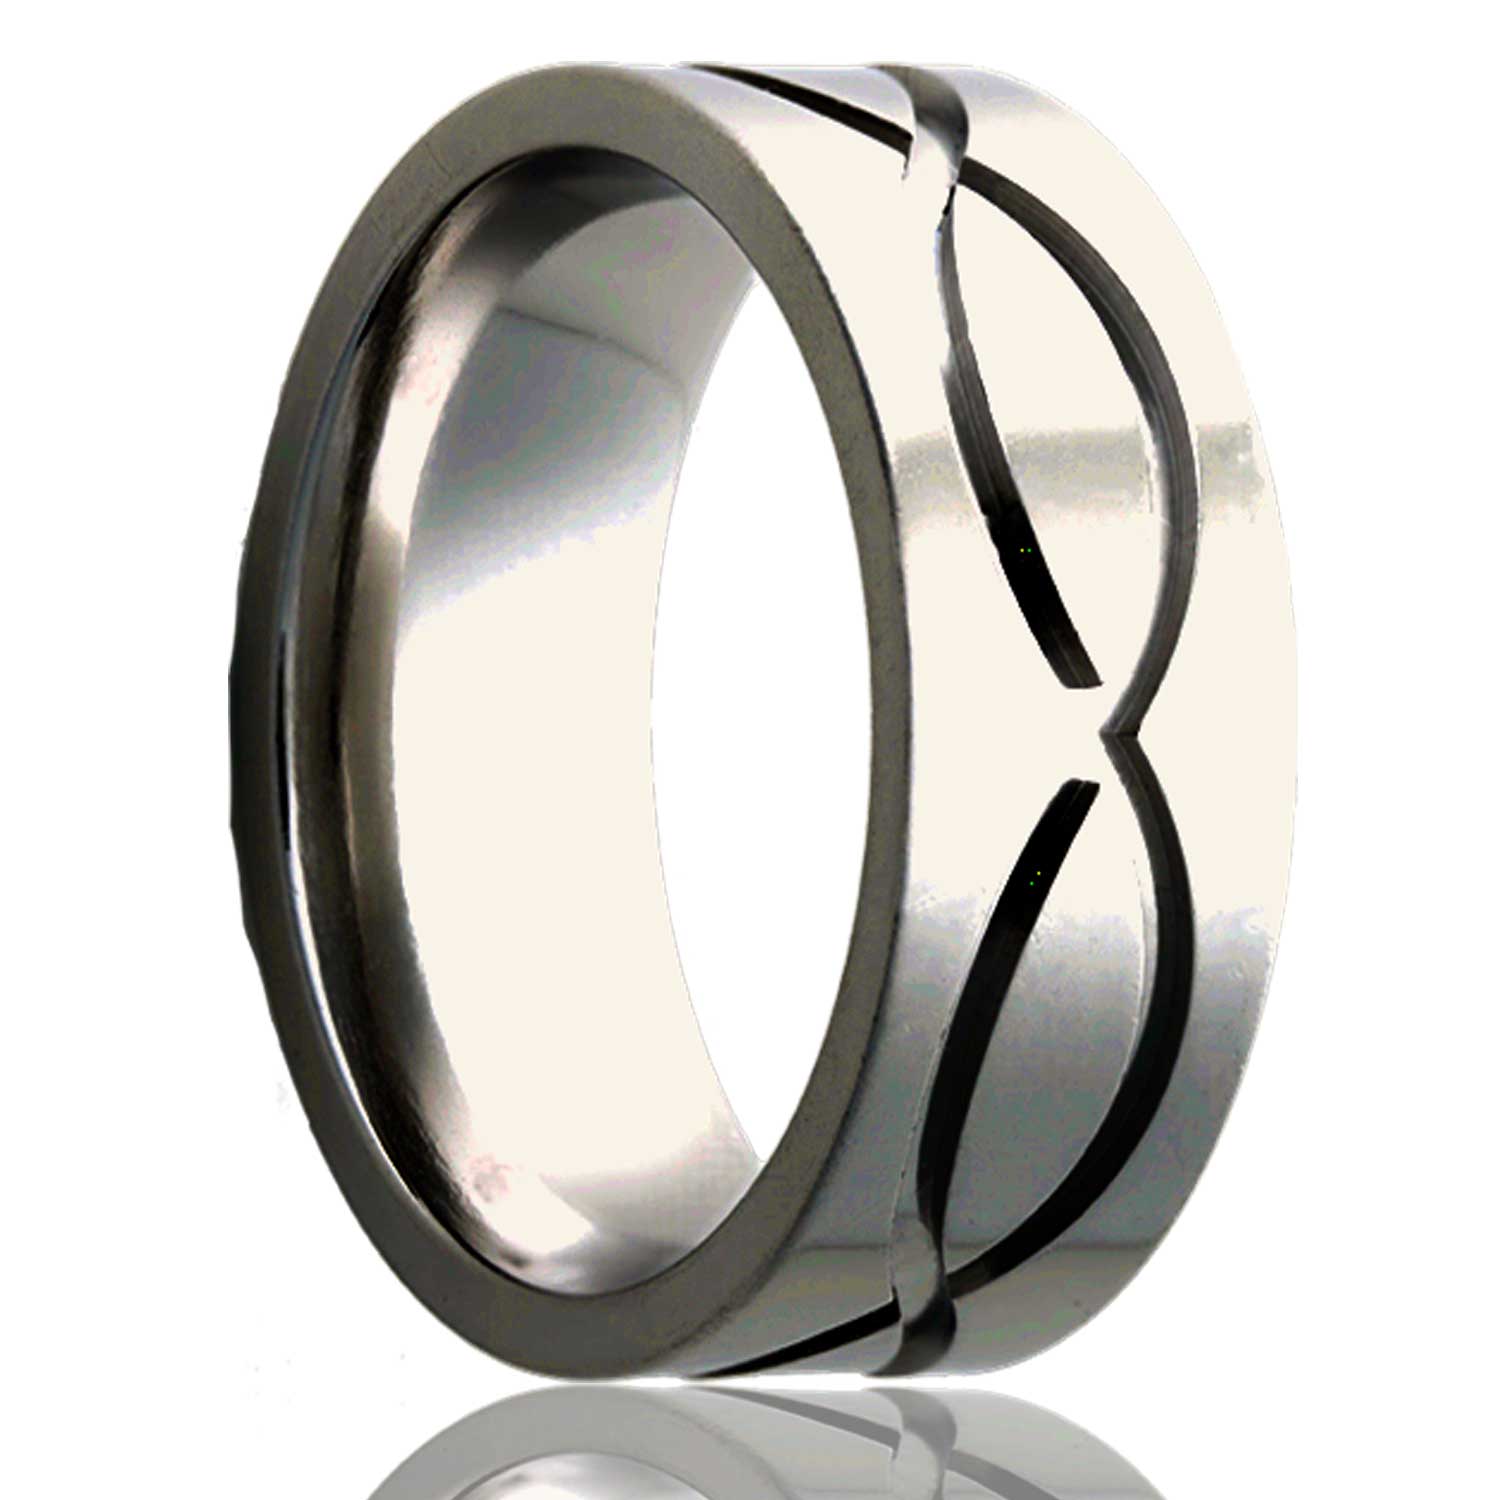 A infinity waves cobalt wedding band displayed on a neutral white background.